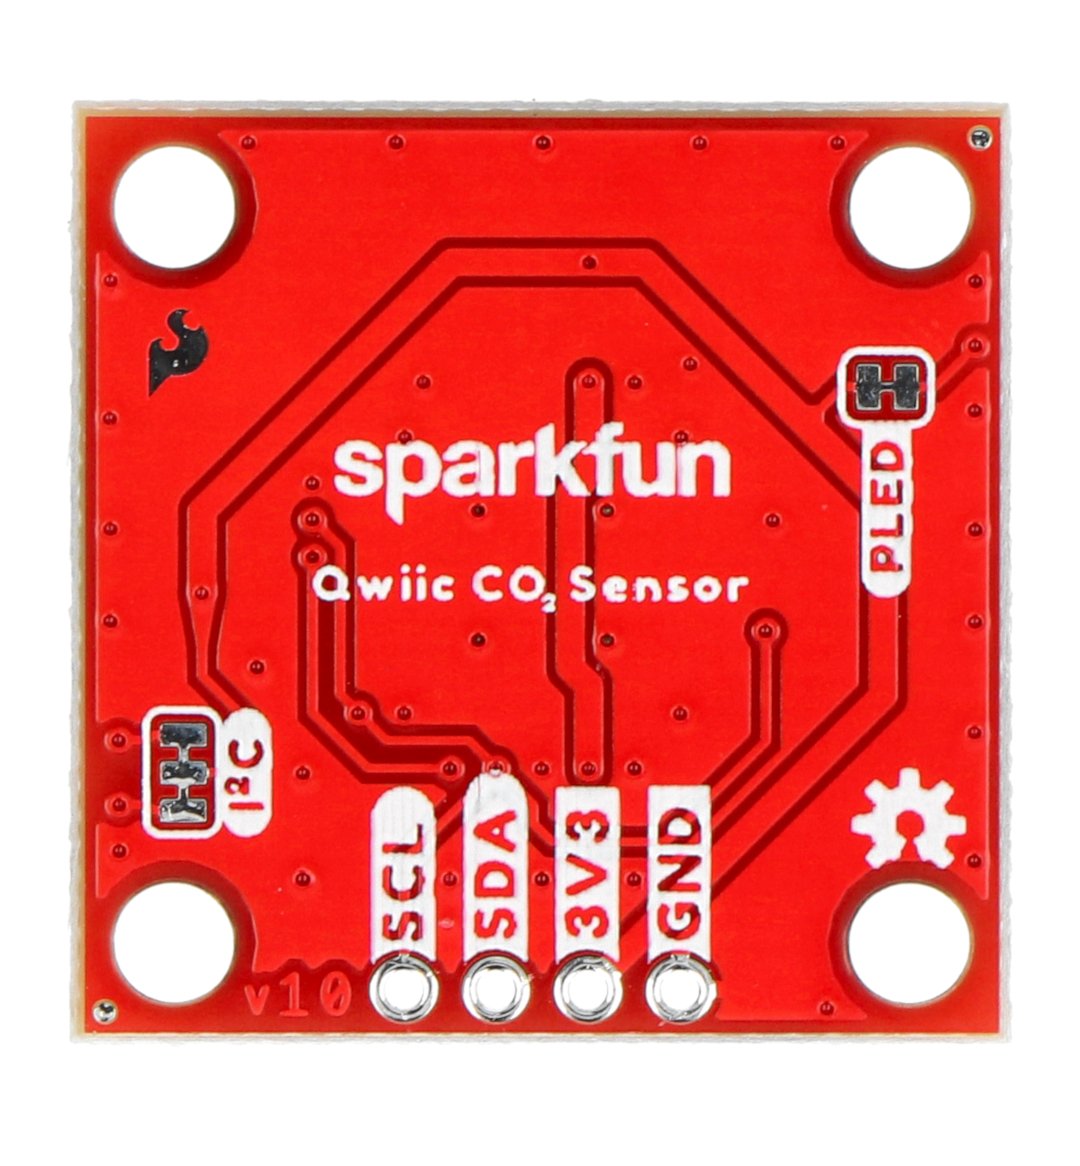 The red sparkfun temperature, humidity and CO2 sensor lies upside down on a white background.